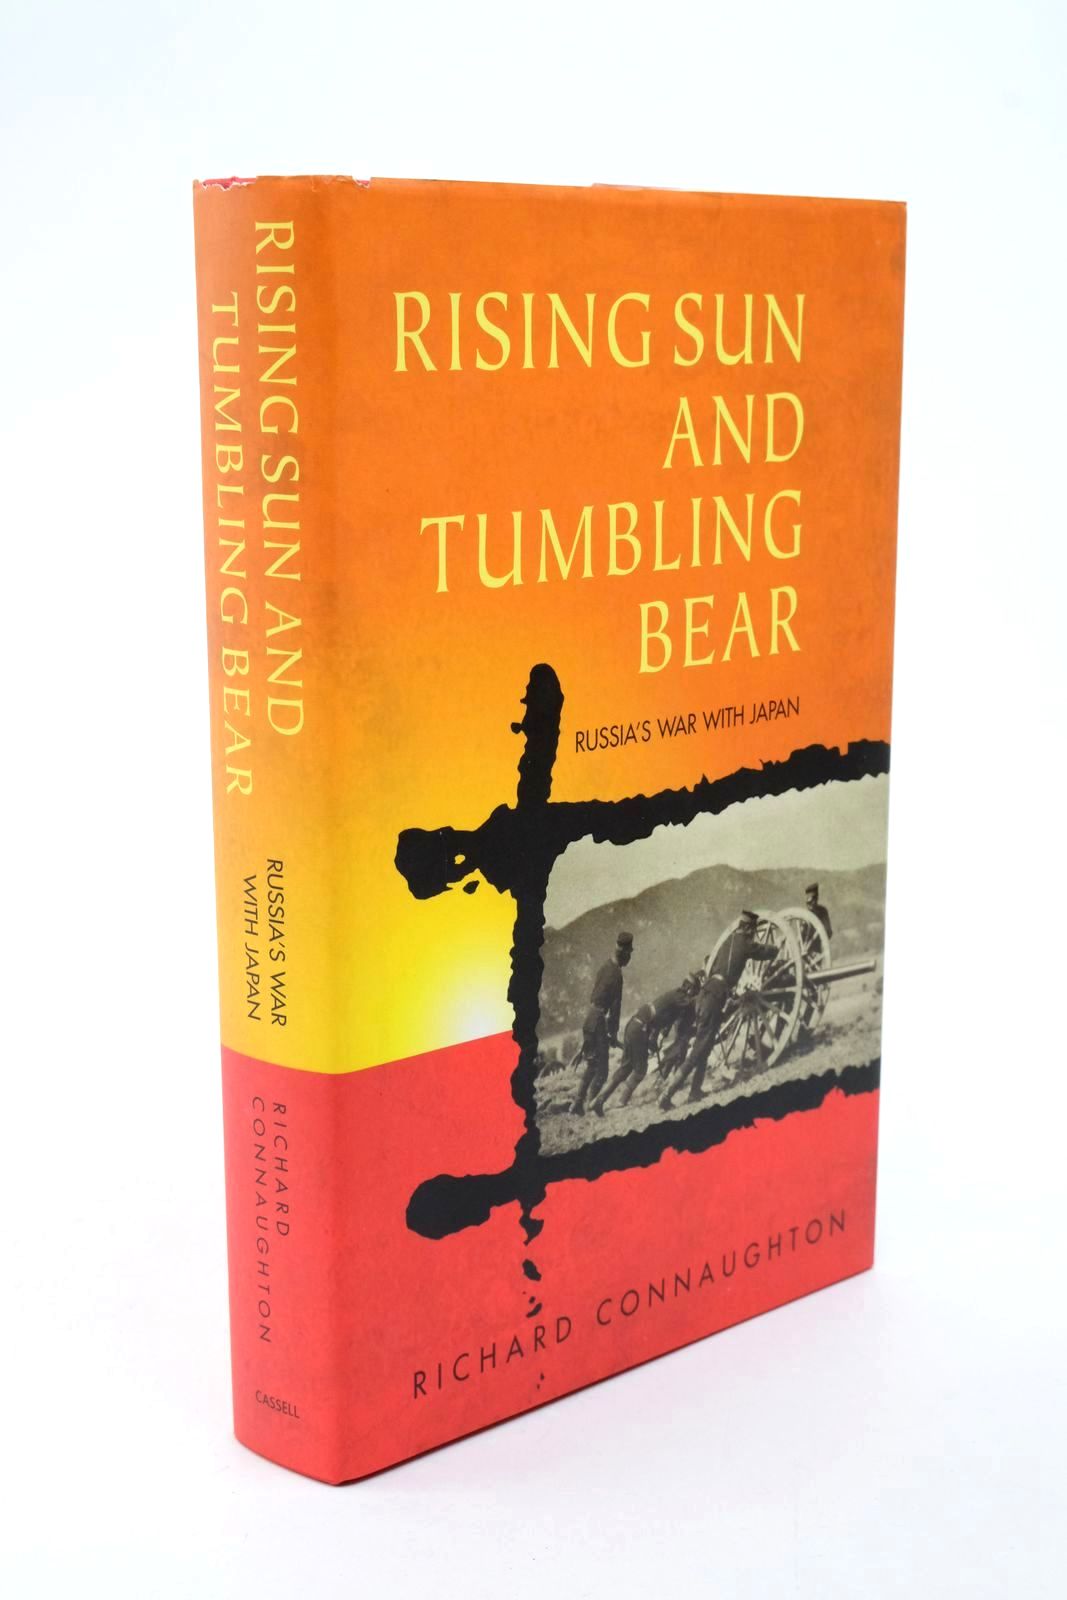 Photo of RISING SUN AND TUMBLING BEAR - RUSSIA'S WAR WITH JAPAN- Stock Number: 1322602